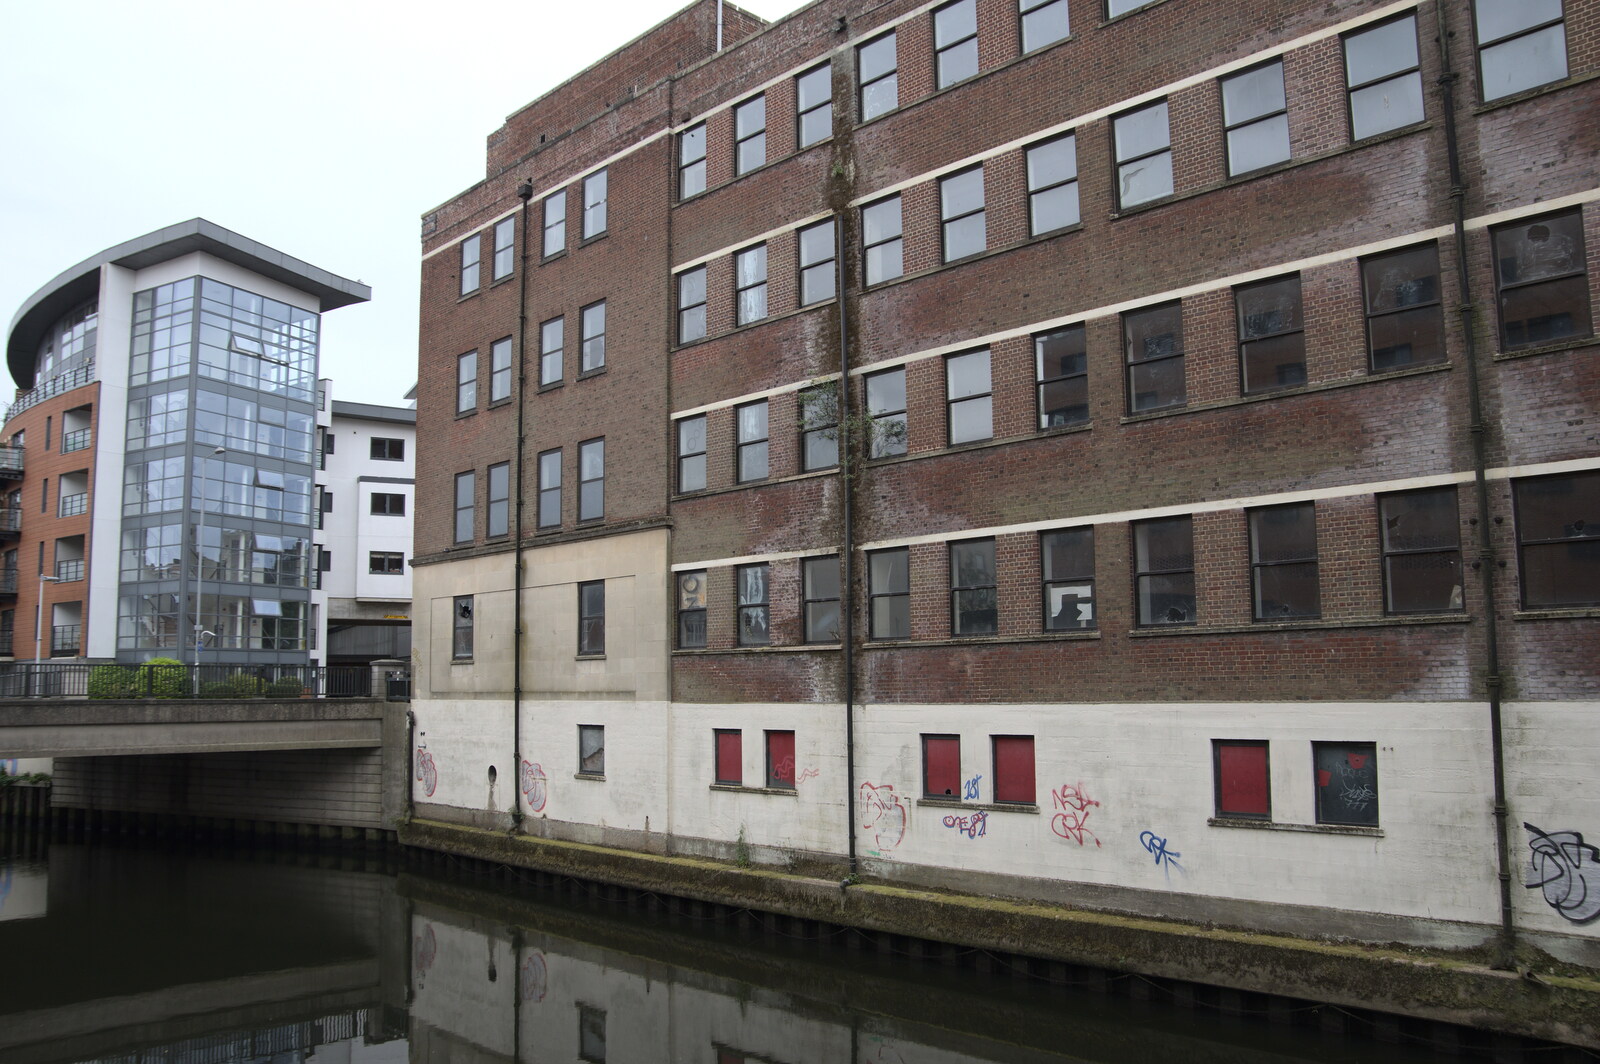 Semi-derelict warehouse on Duke Street from Discovering the Hidden City: Norwich, Norfolk - 23rd May 2022